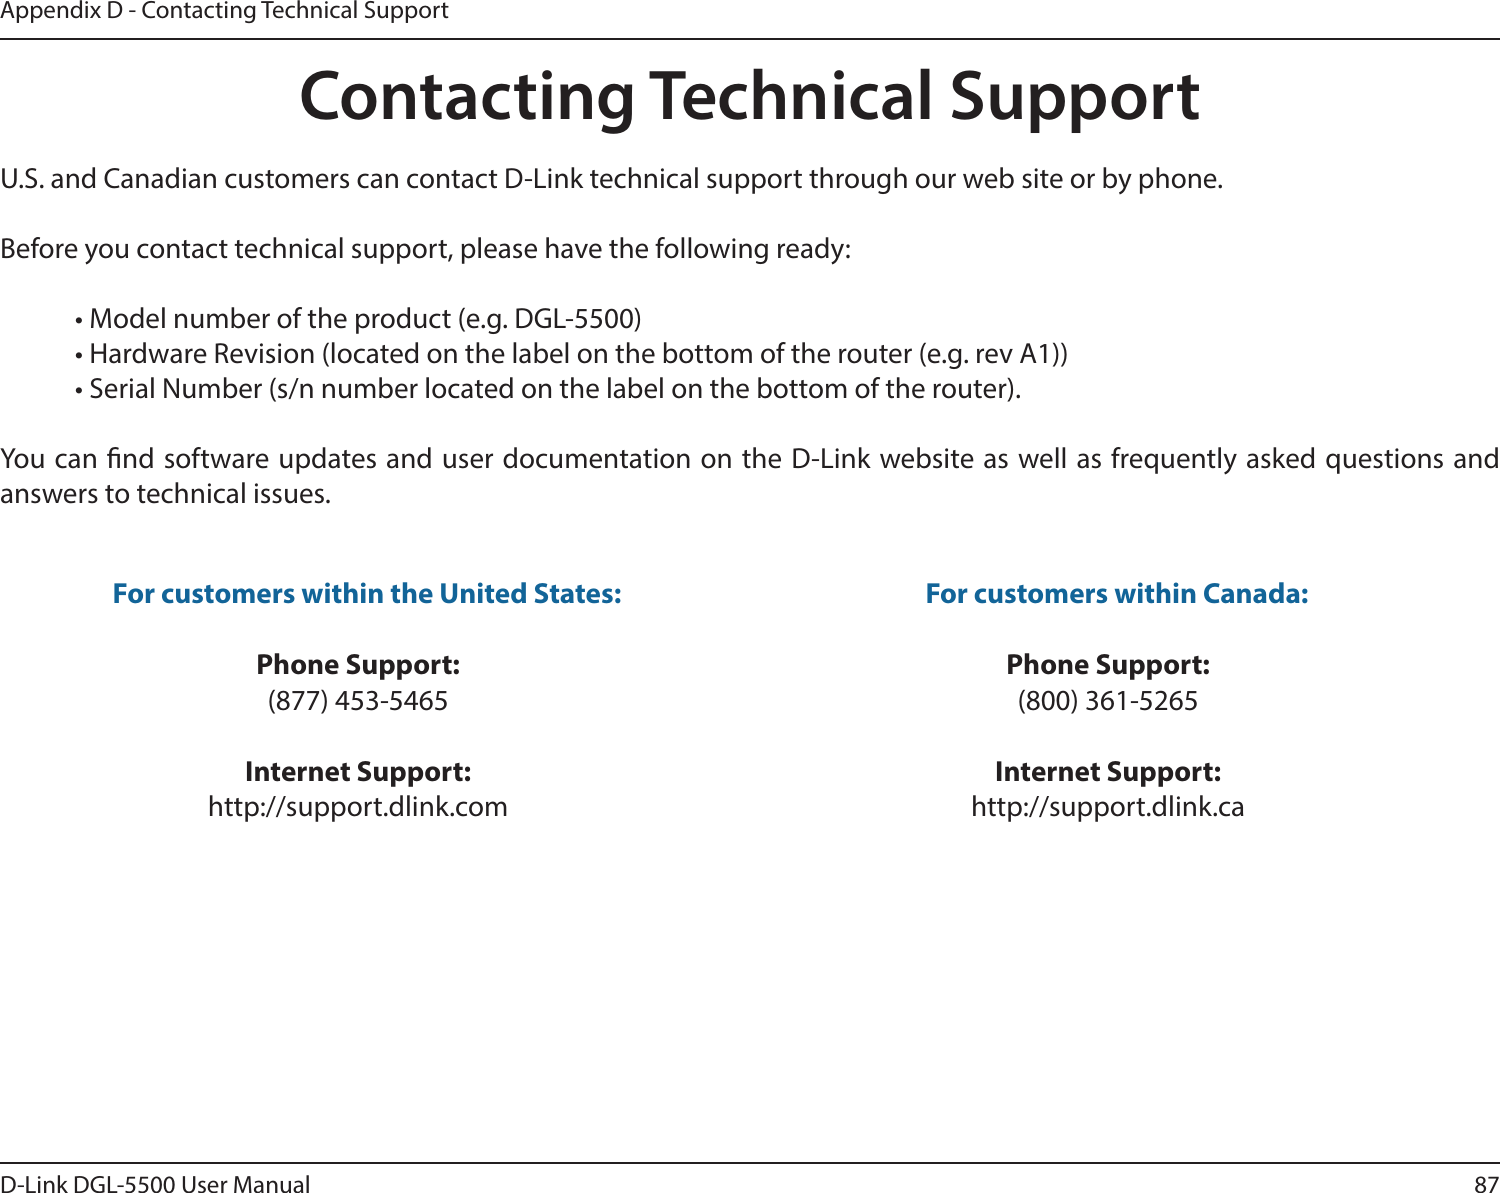 87D-Link DGL-5500 User ManualAppendix D - Contacting Technical SupportContacting Technical SupportU.S. and Canadian customers can contact D-Link technical support through our web site or by phone.Before you contact technical support, please have the following ready:  • Model number of the product (e.g. DGL-5500)  • Hardware Revision (located on the label on the bottom of the router (e.g. rev A1))  • Serial Number (s/n number located on the label on the bottom of the router). You can nd software updates and user documentation on the D-Link website as well as frequently asked questions and answers to technical issues.For customers within the United States: Phone Support:(877) 453-5465Internet Support:http://support.dlink.com For customers within Canada: Phone Support:(800) 361-5265Internet Support:http://support.dlink.ca 